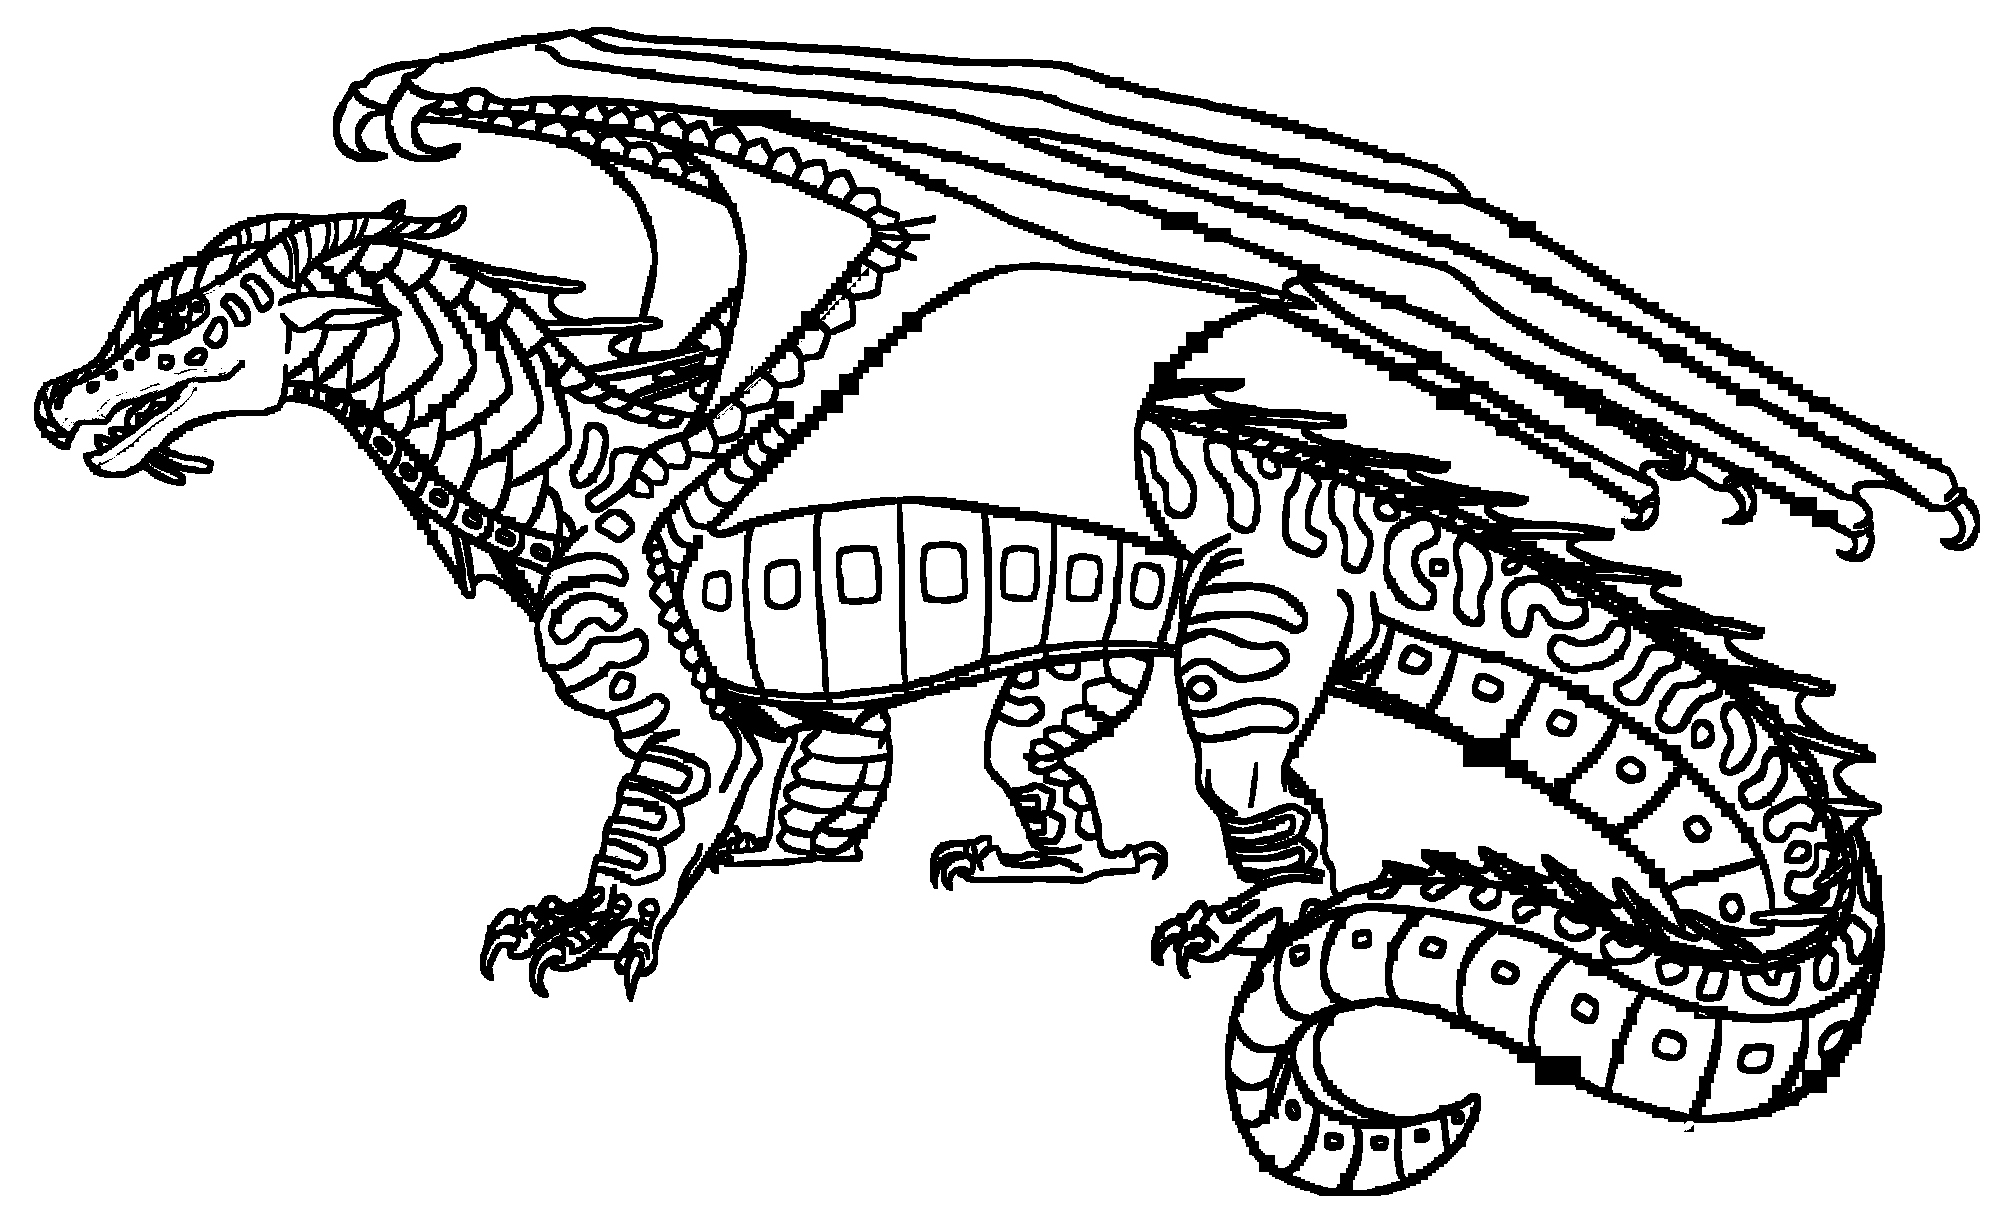 Free Wings Of Fire Coloring Pages Pdf To Print - Coloringfolder.com